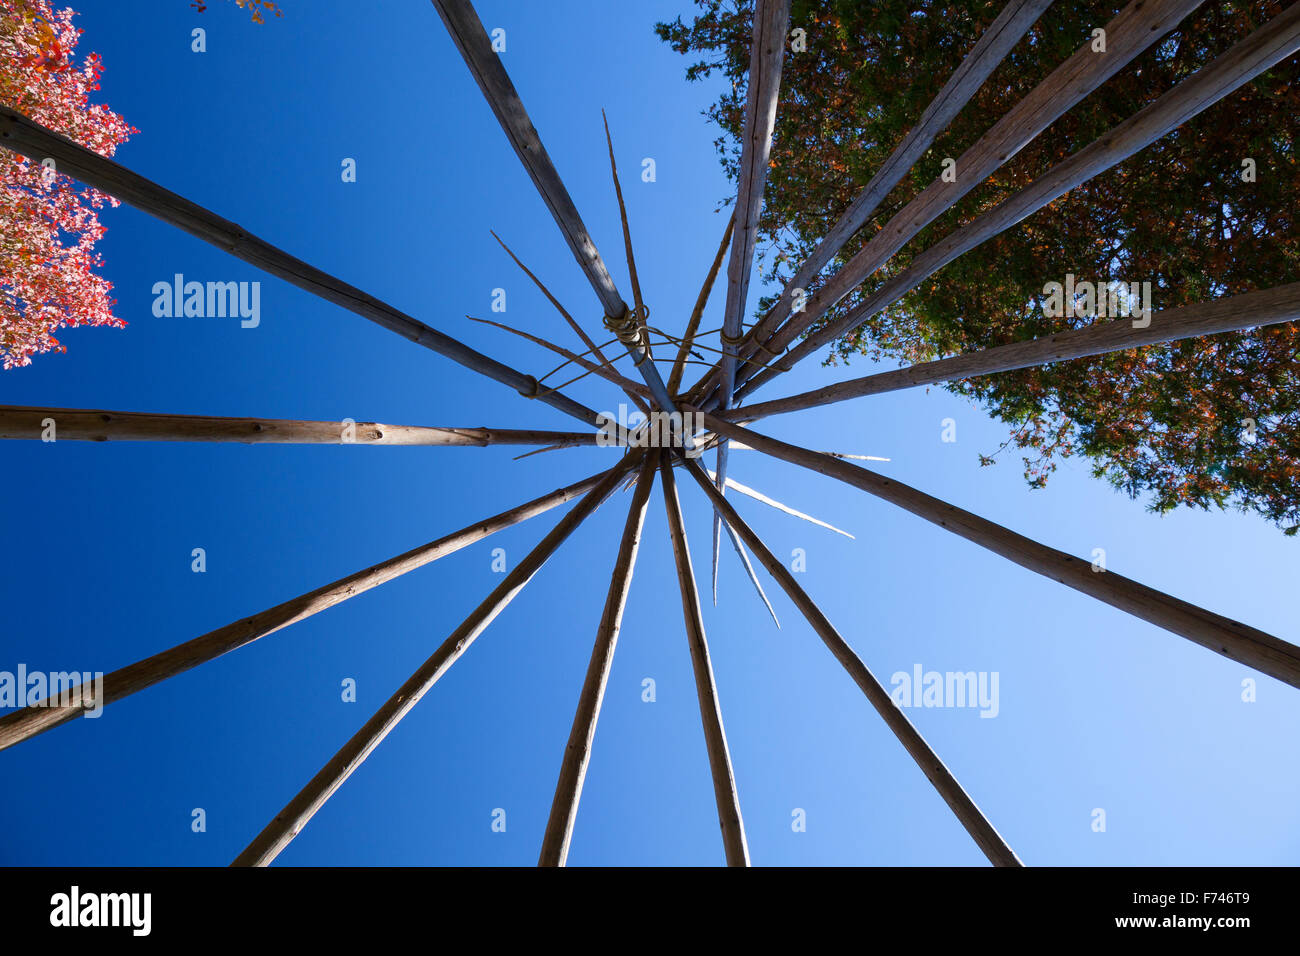 Looking up towards the top of a Tipi that is missing its traditional animal hide covering. Algonquin Provincial Park, Ontario, C Stock Photo